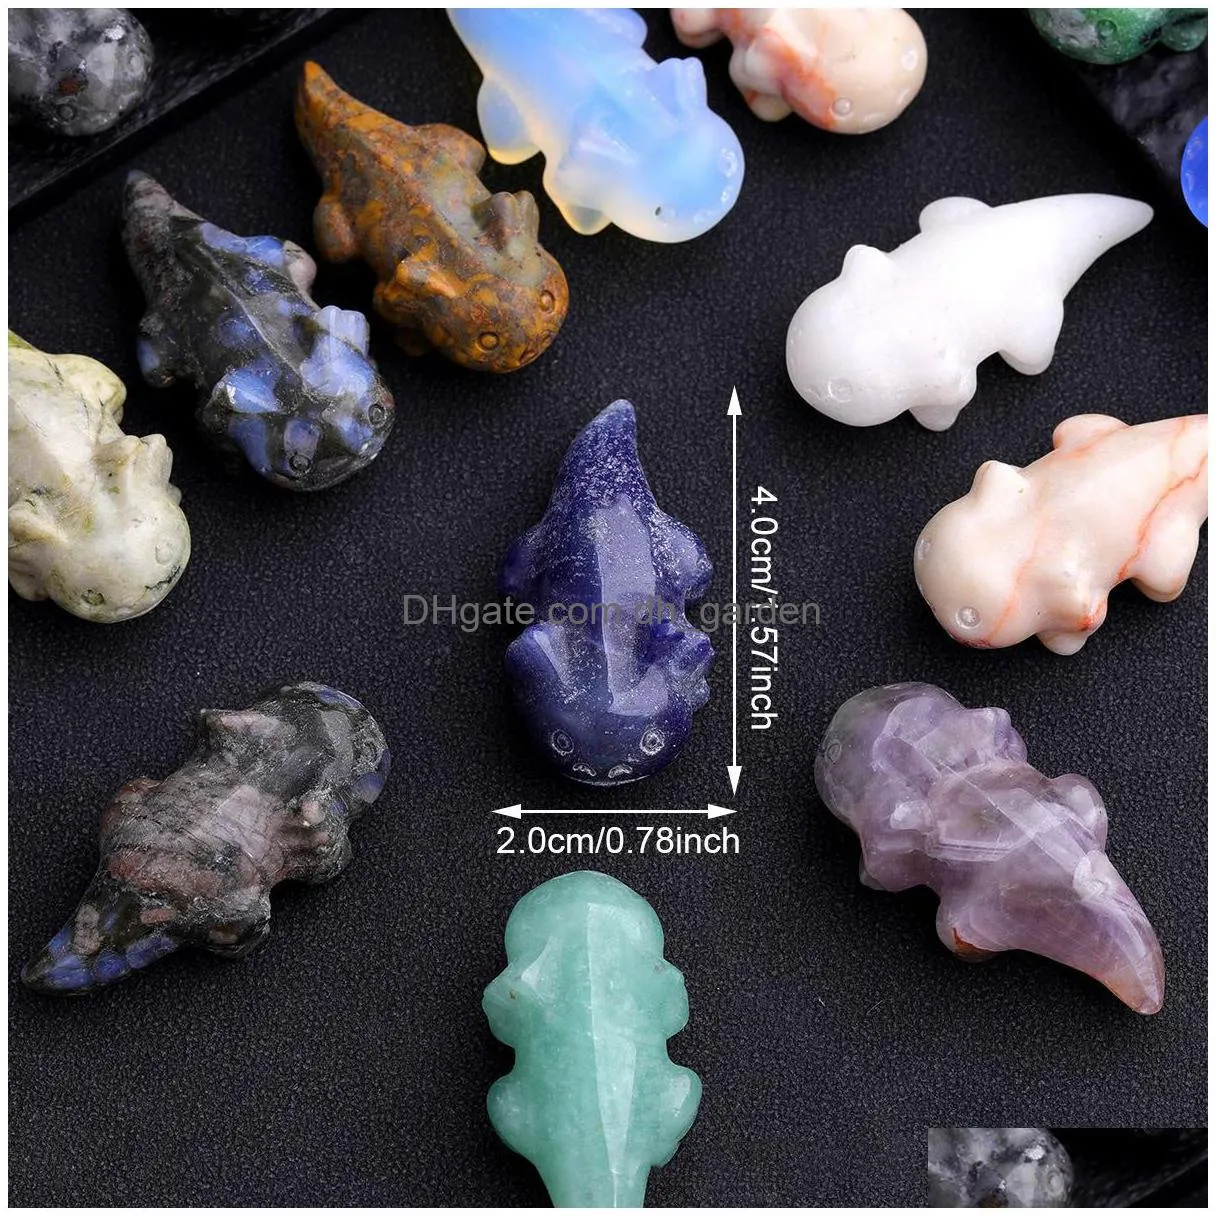 Stone Nt Salamander Fish Statue Natural Stone Quartz Crystal Healing Carved Stereoscopic Crafts Office Home Desktop Drop Del Dhgarden Dheqv